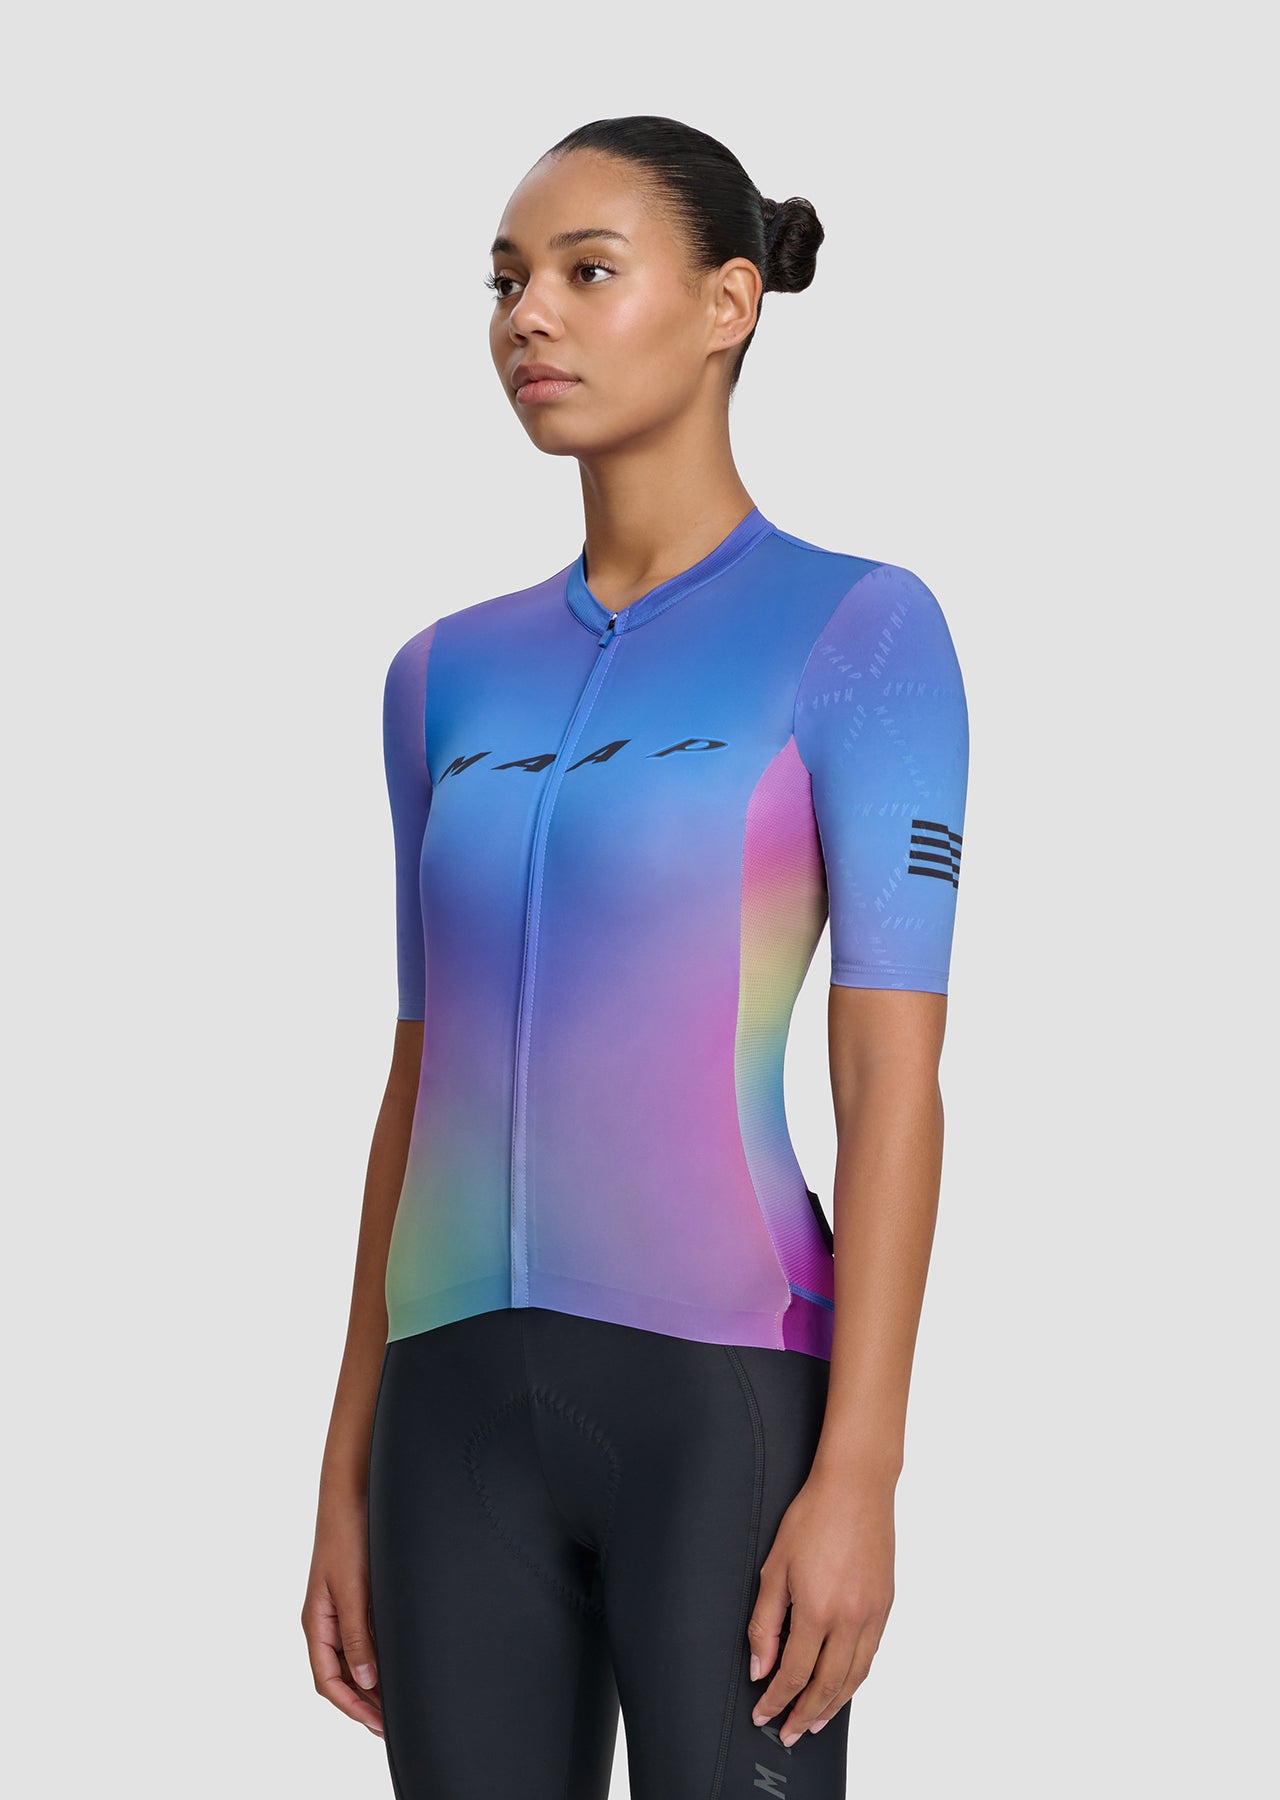 Women's Blurred Out Pro Hex Jersey 2.0